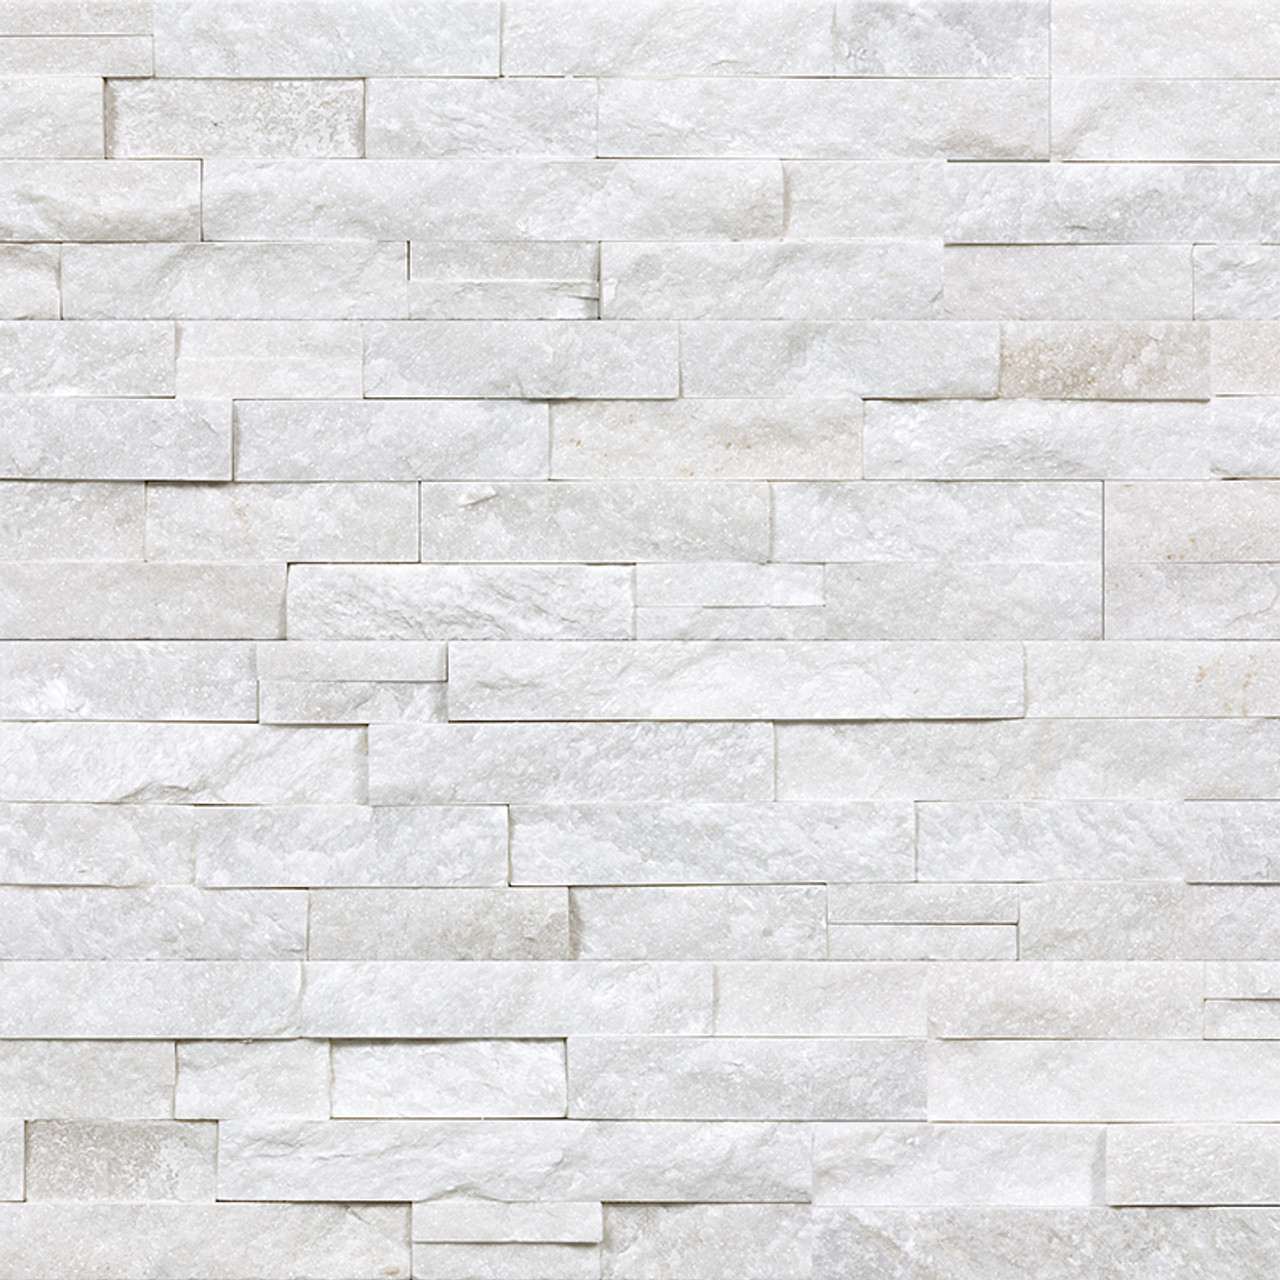 76-368 - Carbon Ledger Stone Panel - Carbon Stacked Stone Ledger Panel -  Anatolia 6x24 Carbon Ledger Stone - Arleystone Carbon Ledger Stone Tile -  Uptown Stone Collection Carbon Ledger Stone Panels - 5004-0008-0